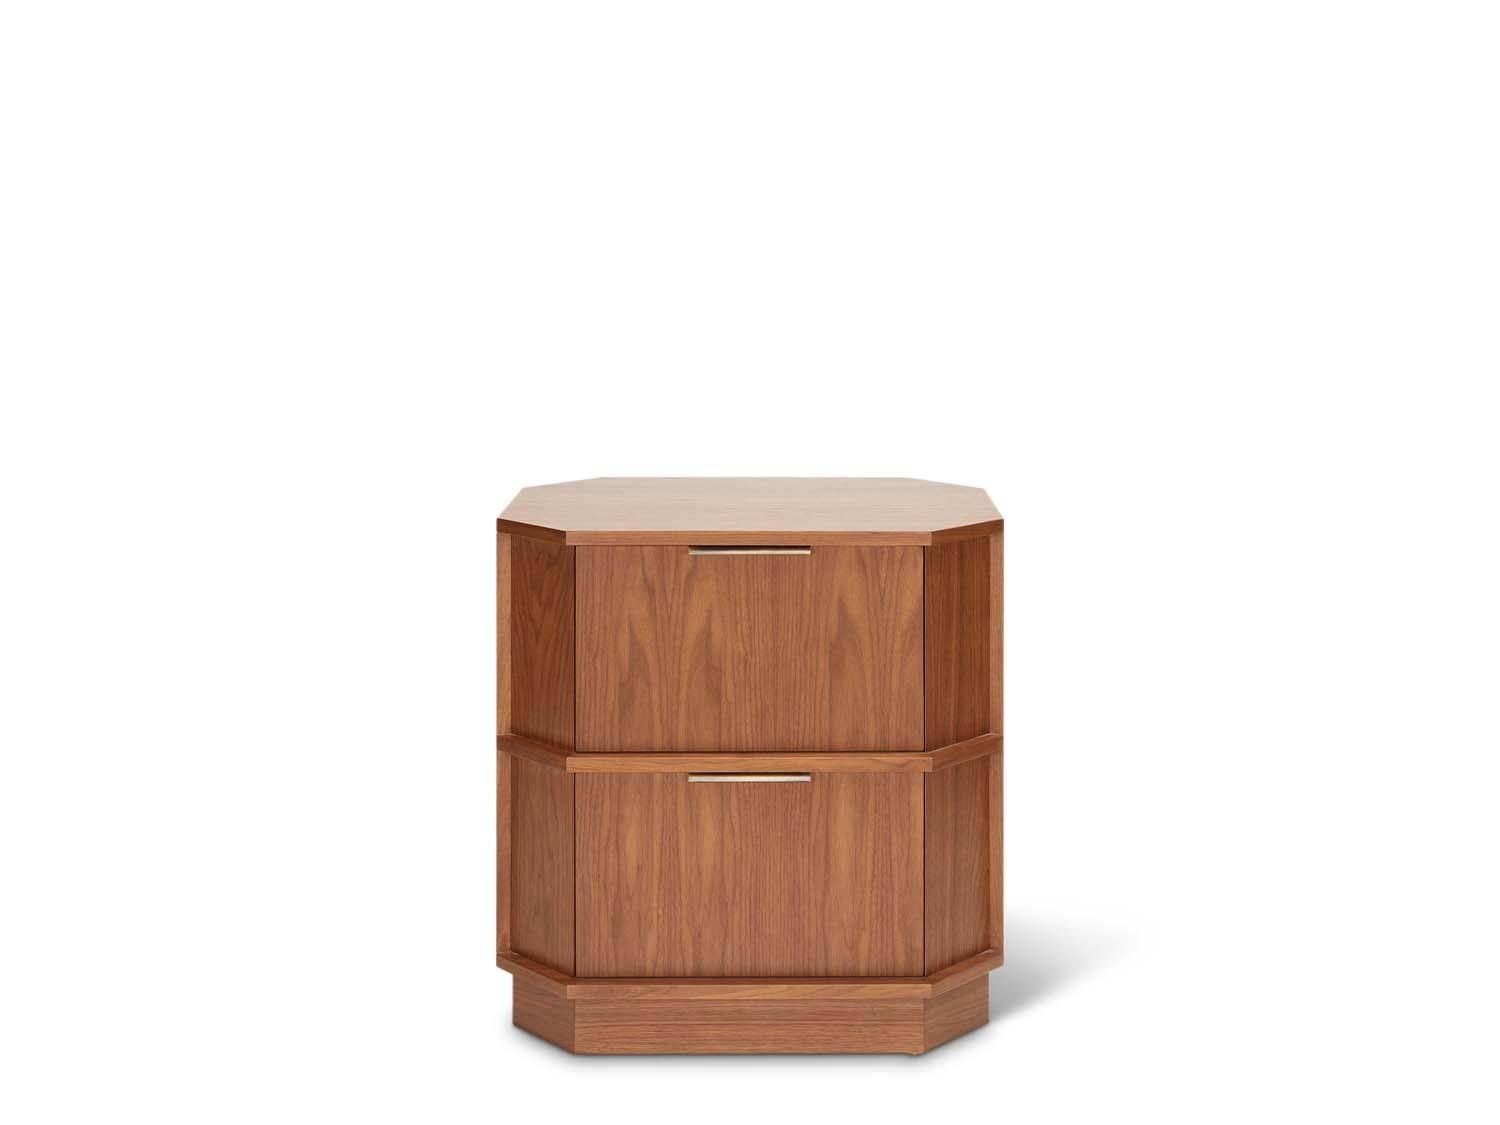 The Clyde Nightstand resembles a 1920s streamlined travel trunk designed for efficiency and style for cross-continental train rides.

The DISC Interiors x LF six-piece capsule collection pulls design inspiration from the romance of